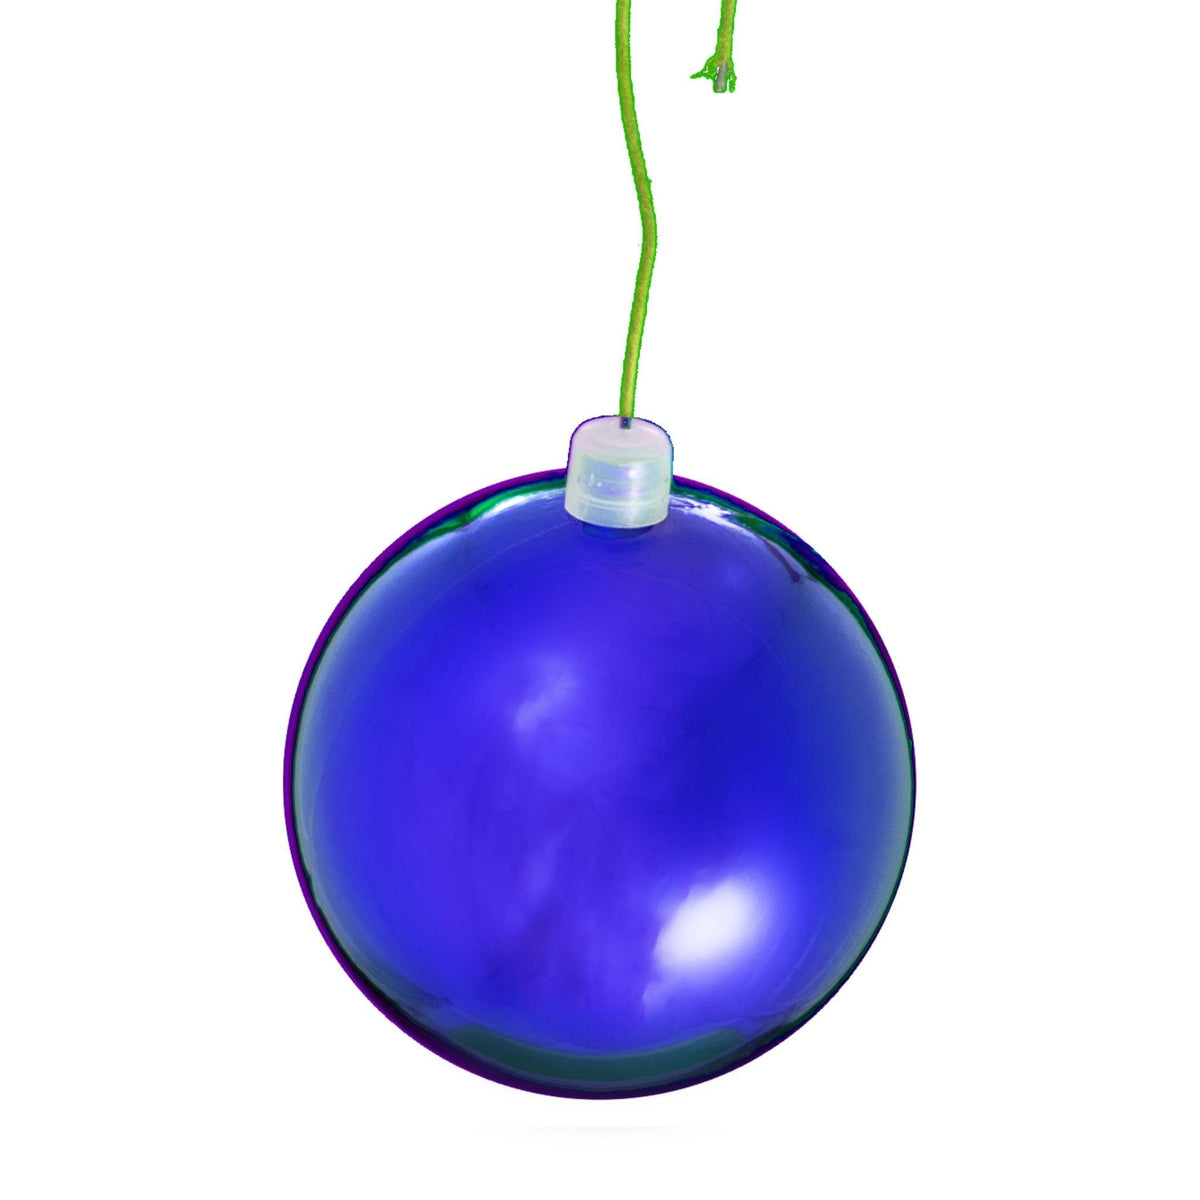 Lee Display offers brand new Shiny Blue Plastic Ball Ornaments at wholesale prices for affordable Christmas Tree Hanging and Holiday Decorating on sale at leedisplay.com